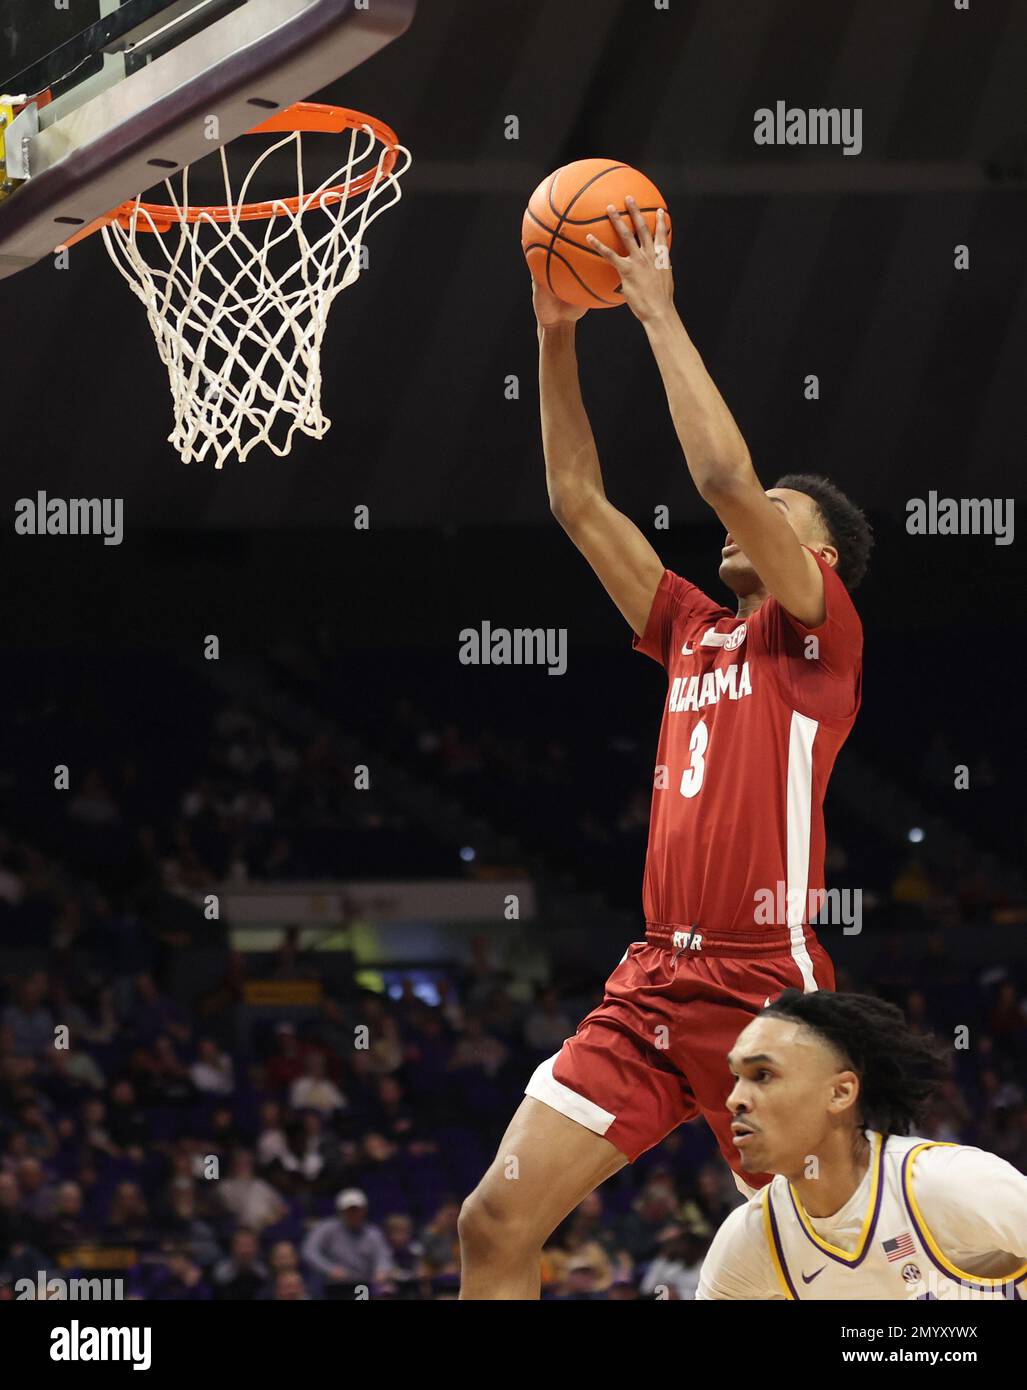 Baton Rouge, USA. 04th Feb, 2023. Alabama Crimson Tide guard Rylan Griffen (3) throws down a breakaway dunk during a men's college basketball game at the Pete Maravich Assembly Center in Baton Rouge, Louisiana on Saturday, February 4, 2023. (Photo by Peter G. Forest/Sipa USA) Credit: Sipa USA/Alamy Live News Stock Photo